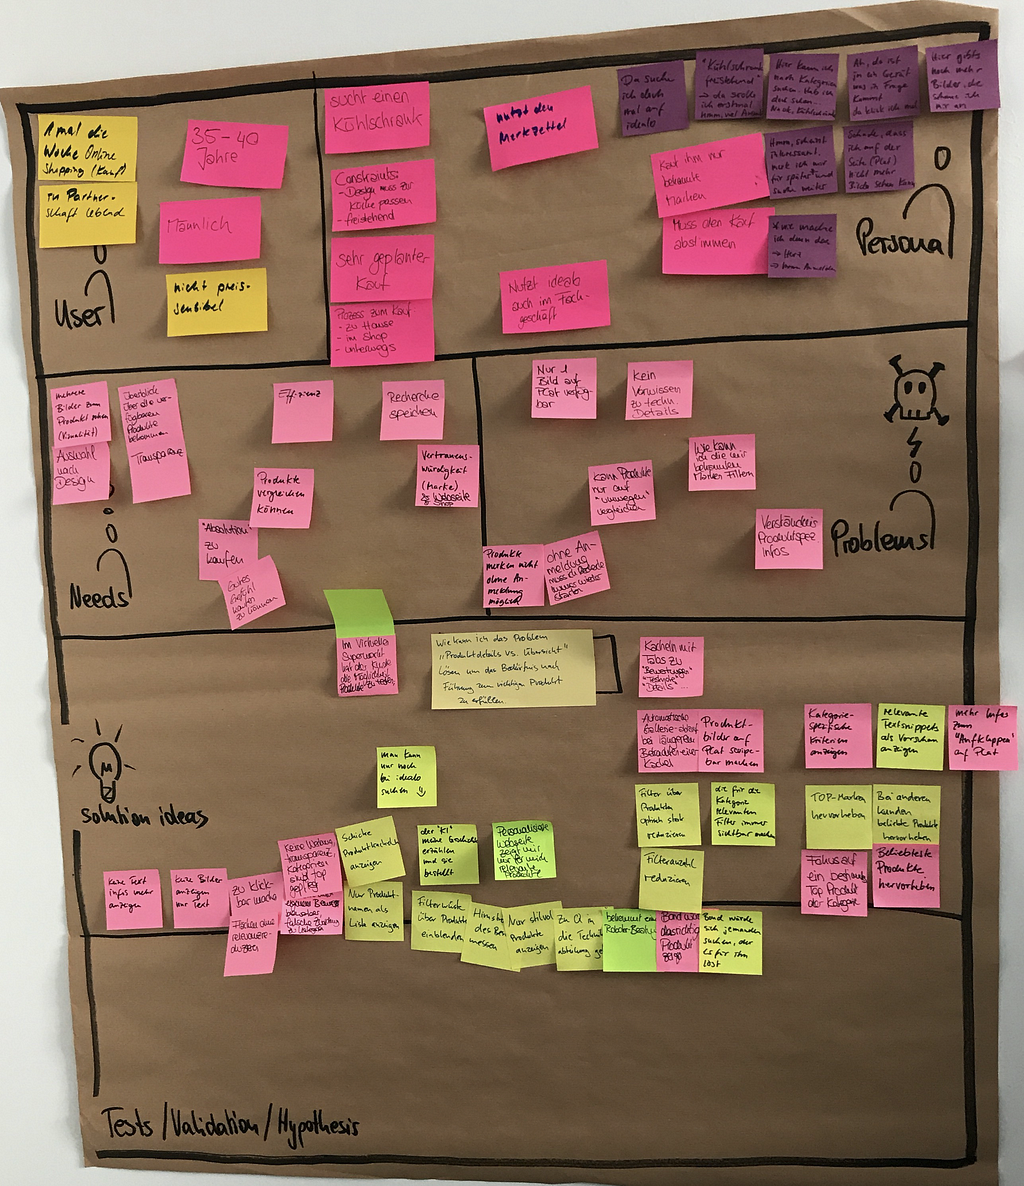 A picture of a paper wall with a lot of stickies. The stickies are clustered in the sections user, needs, problems, solutions